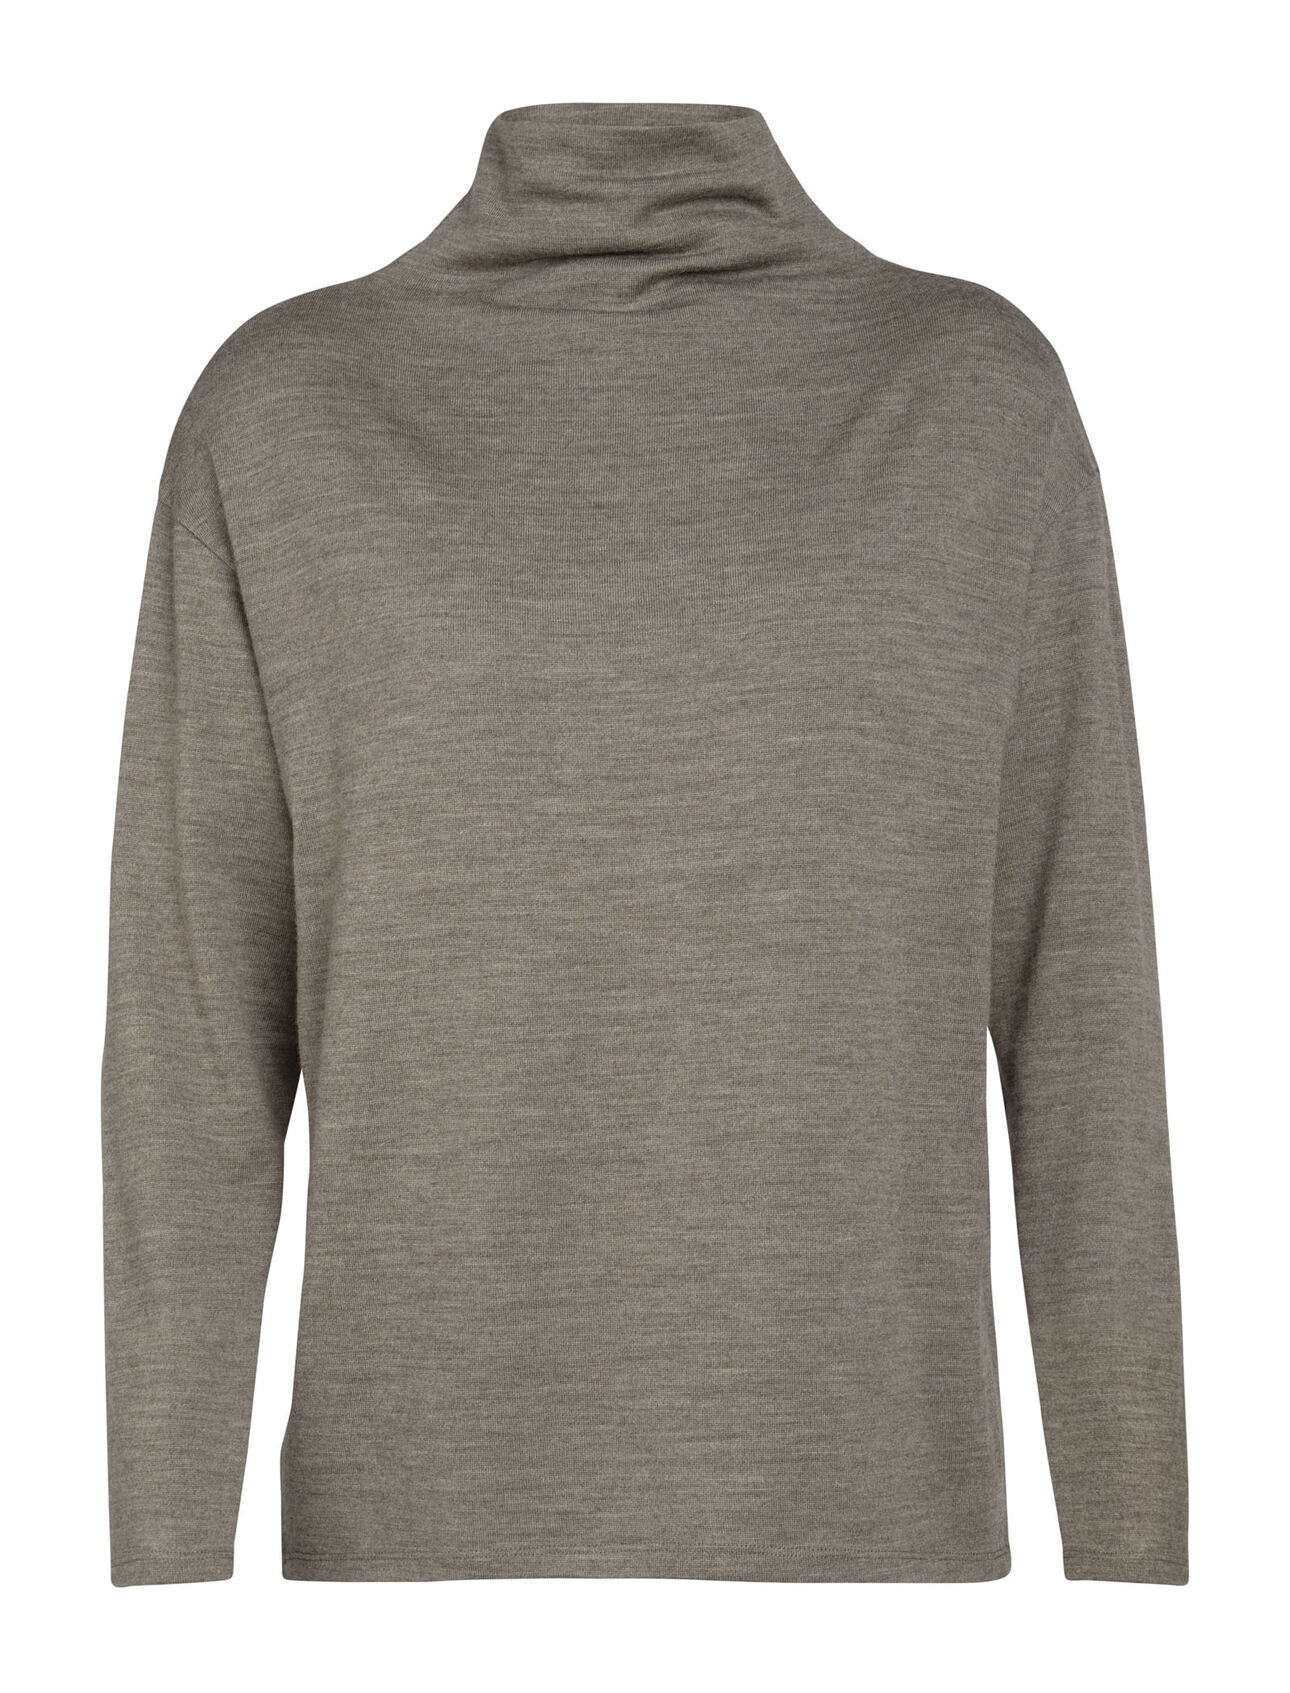 Dámské Merino Deice Long Sleeve Turtleneck Sweater  A modern top with a loose mock-neck design and our 100% merino jersey fabric, the Deice Long Sleeve Turtleneck is versatile, lightweight, and incredibly comfortable.